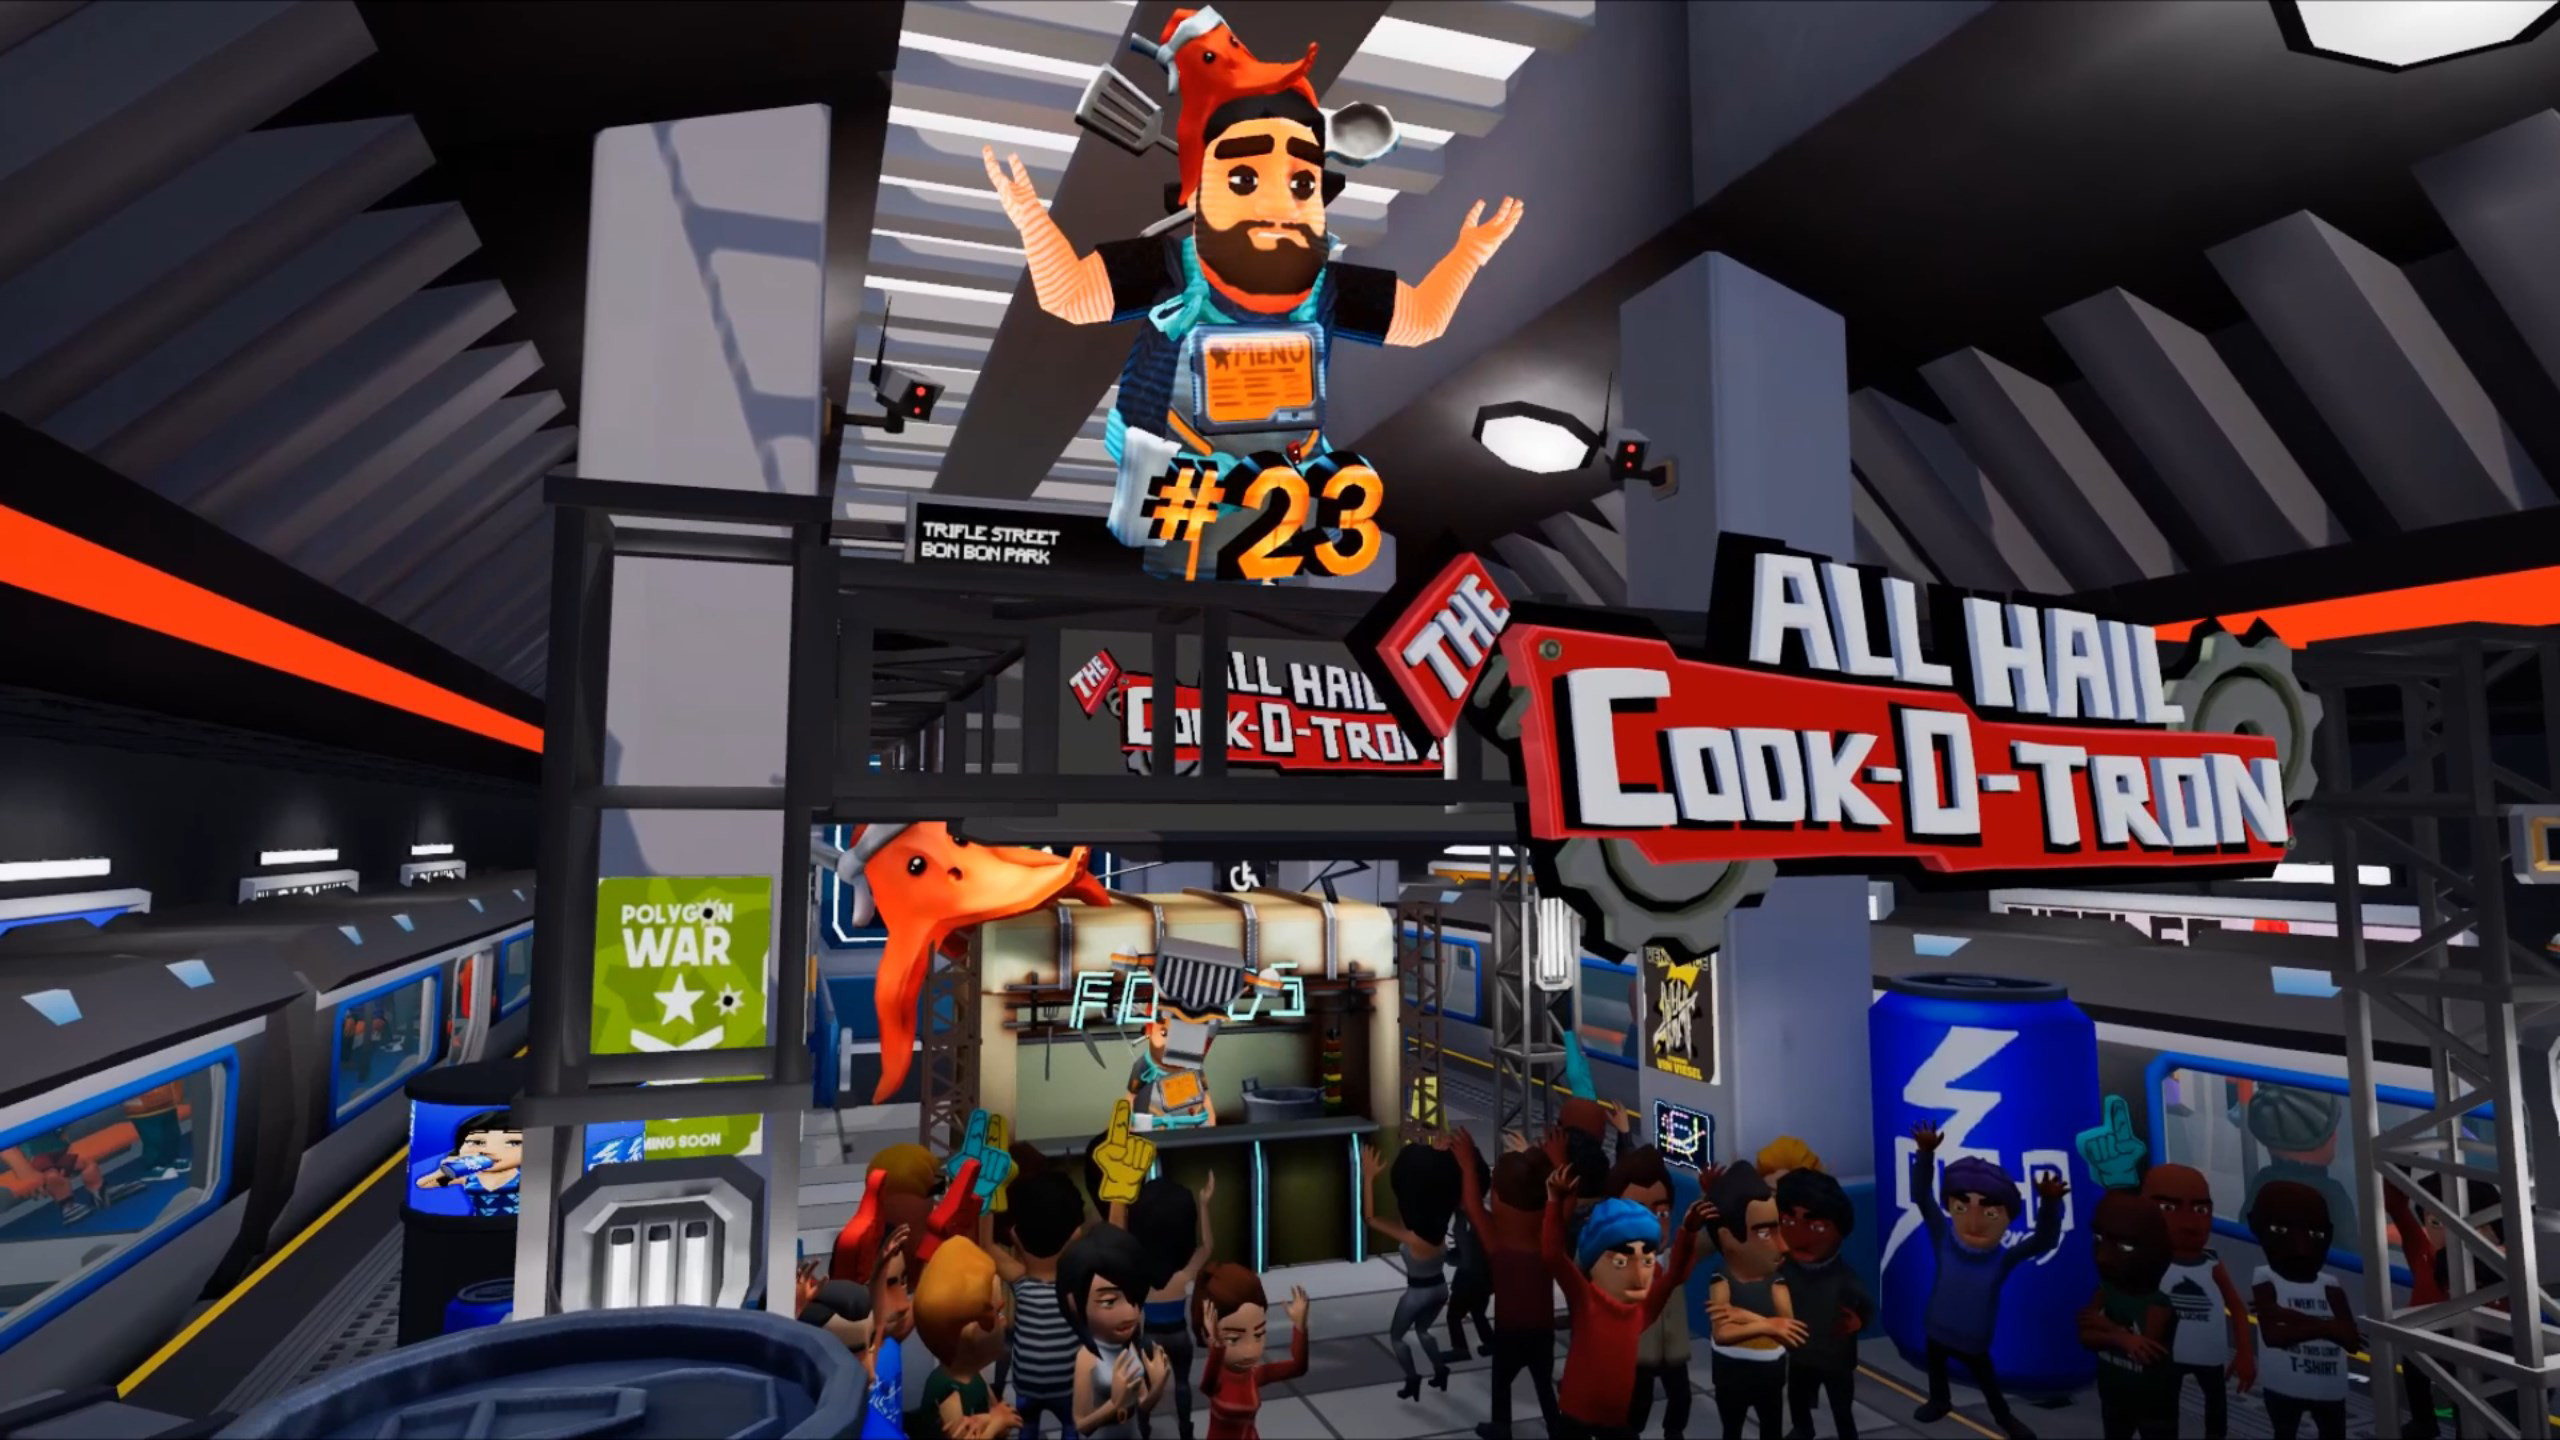 All Hail The Cook-o-tron Is Now Available on Steam For A VR Cooking Experience